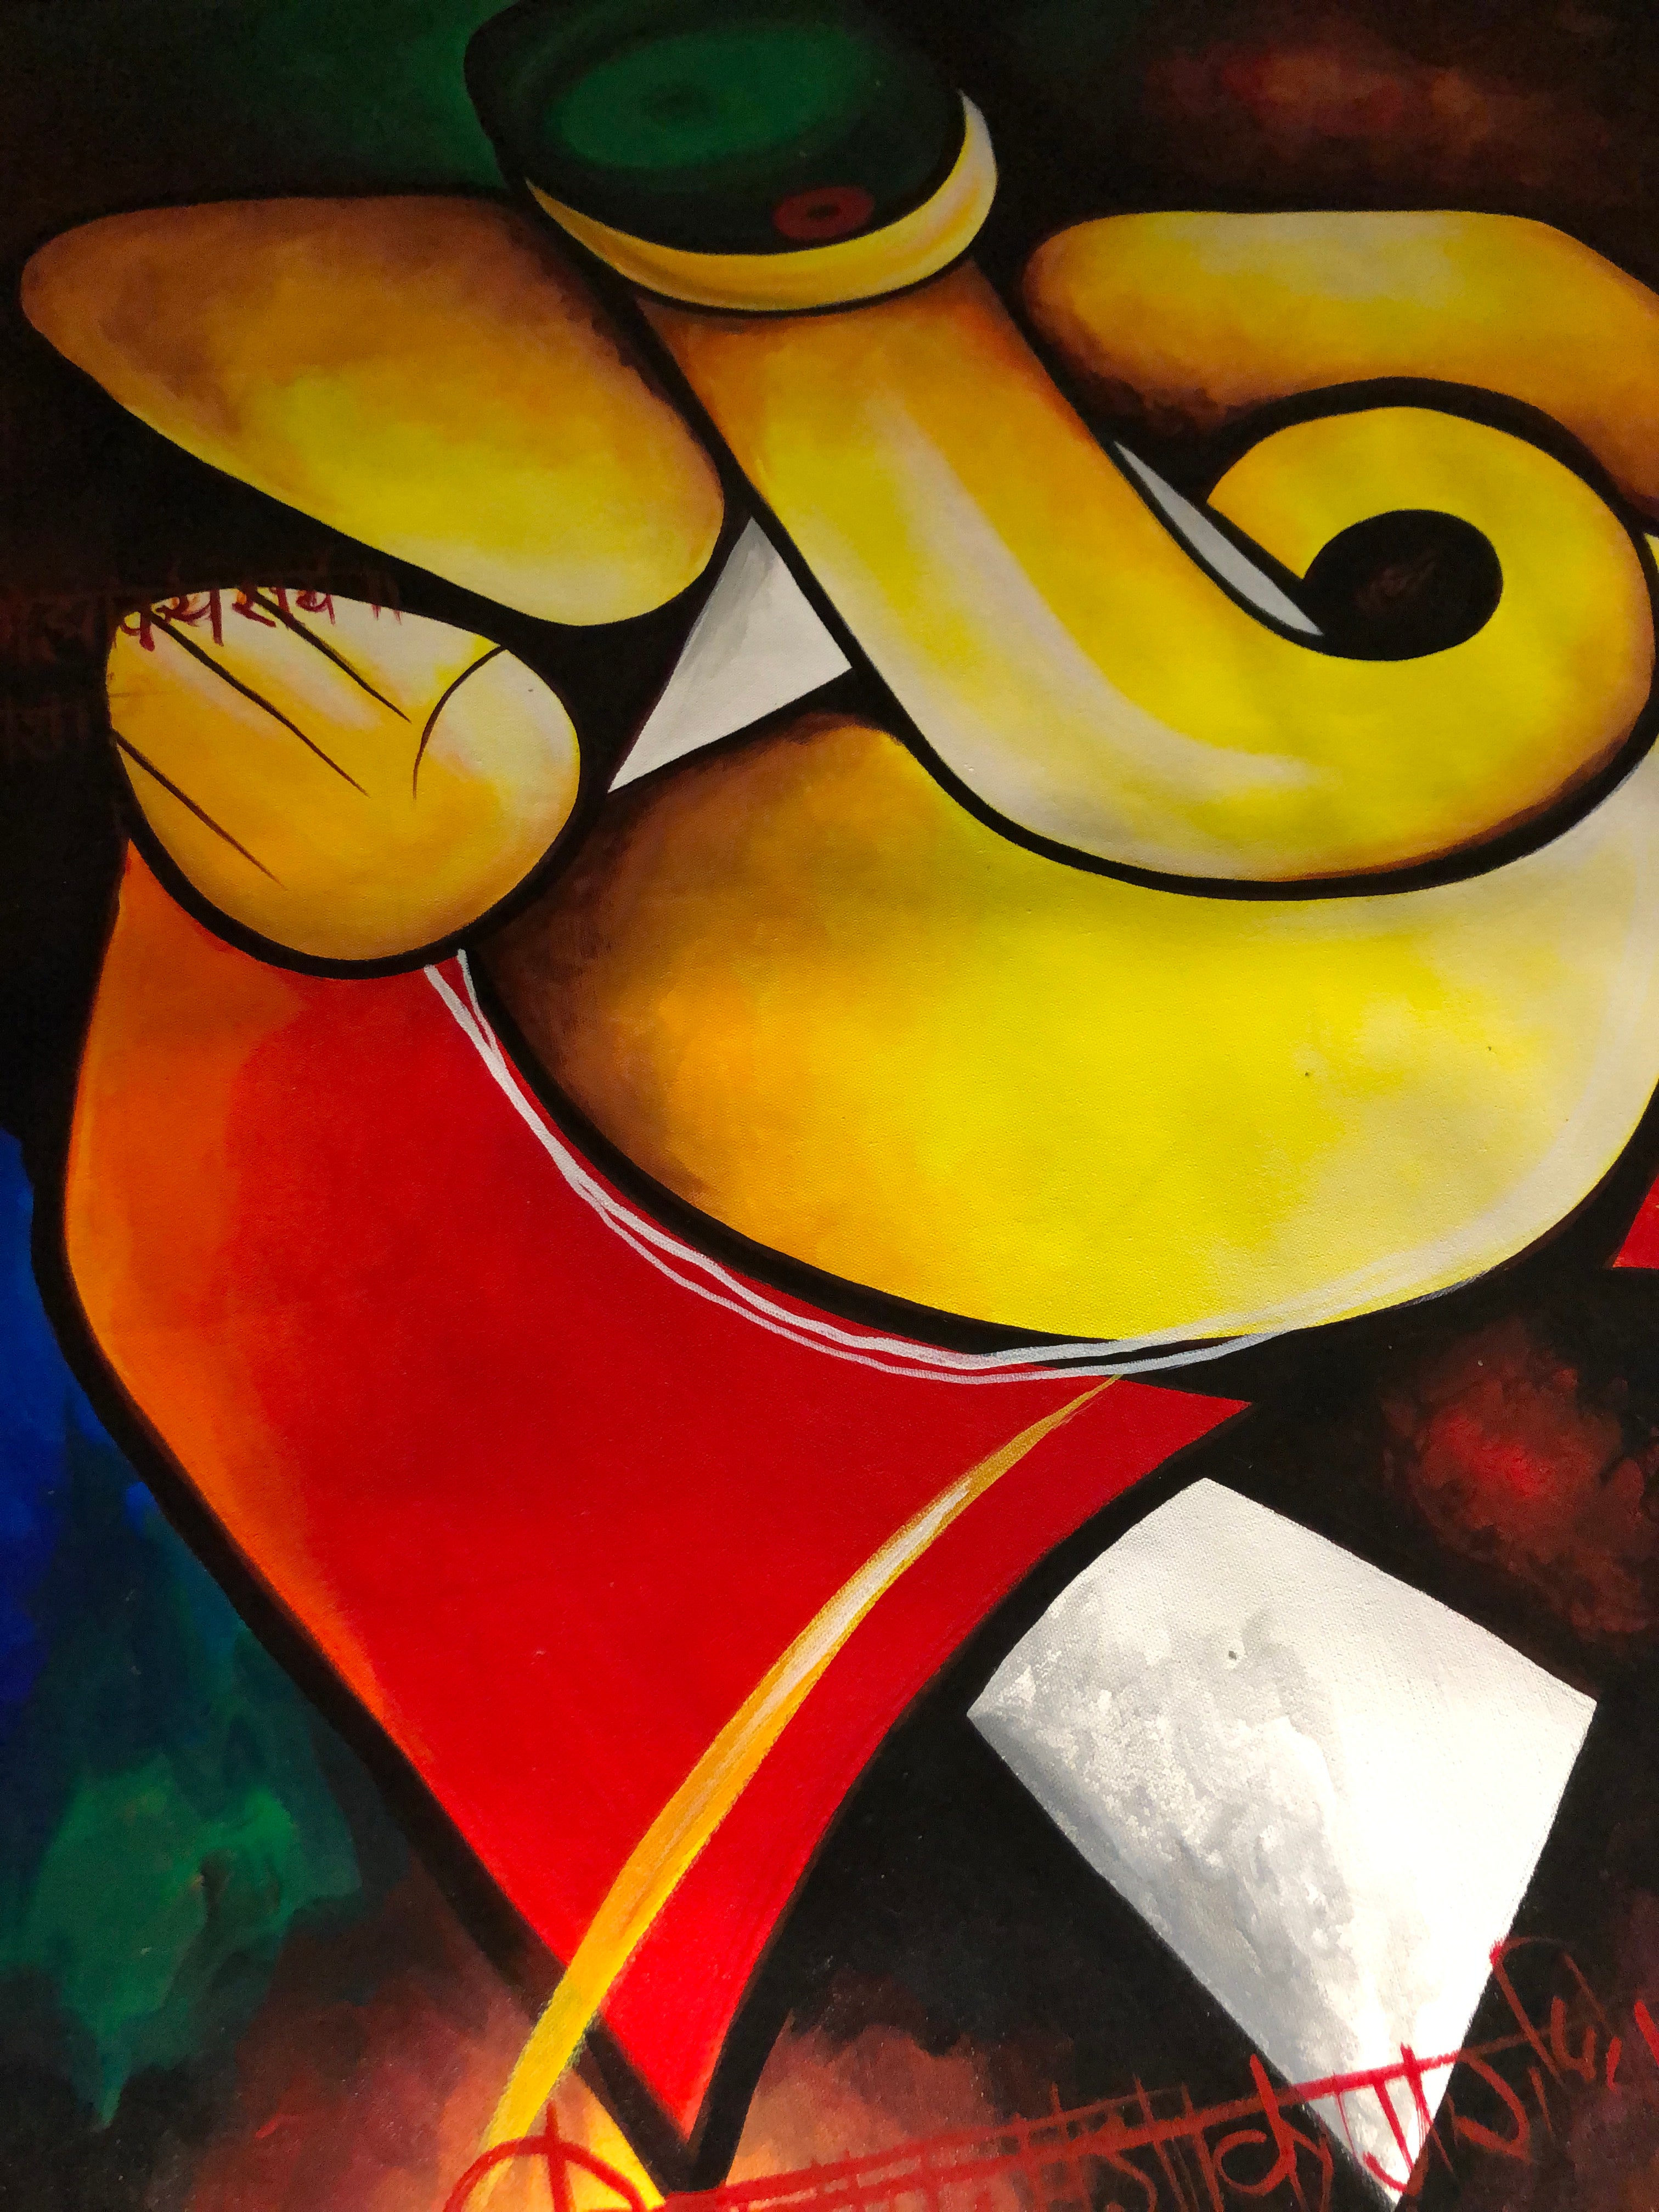 LORD GANESHA - COLORFUL HANDPAINTED ARTWORK - ACRYLIC PAINTING - 44 X 44 INCHES - indiartbazaar